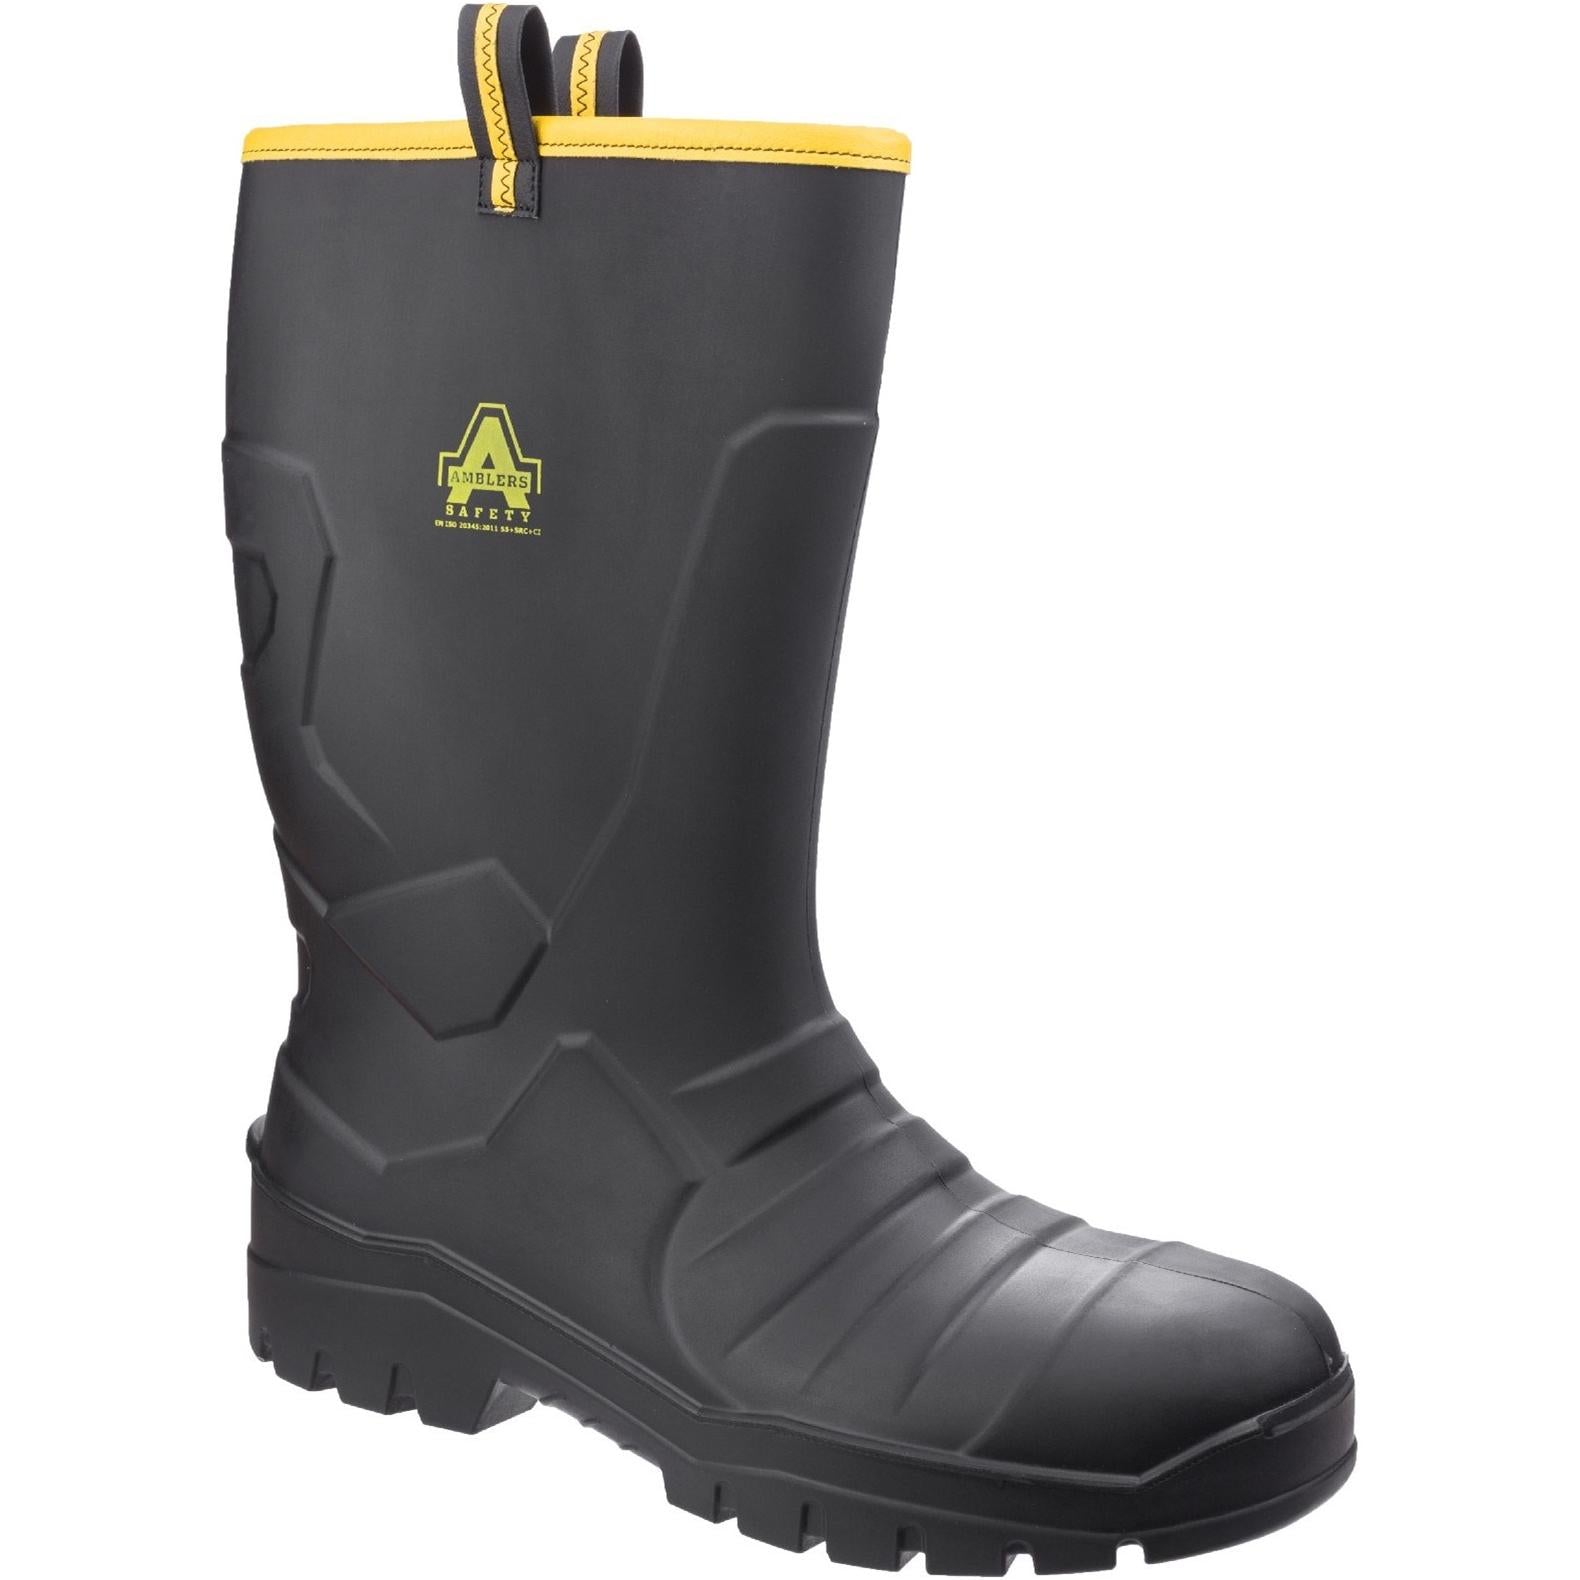 Amblers AS1008 Full Safety Rigger Boot